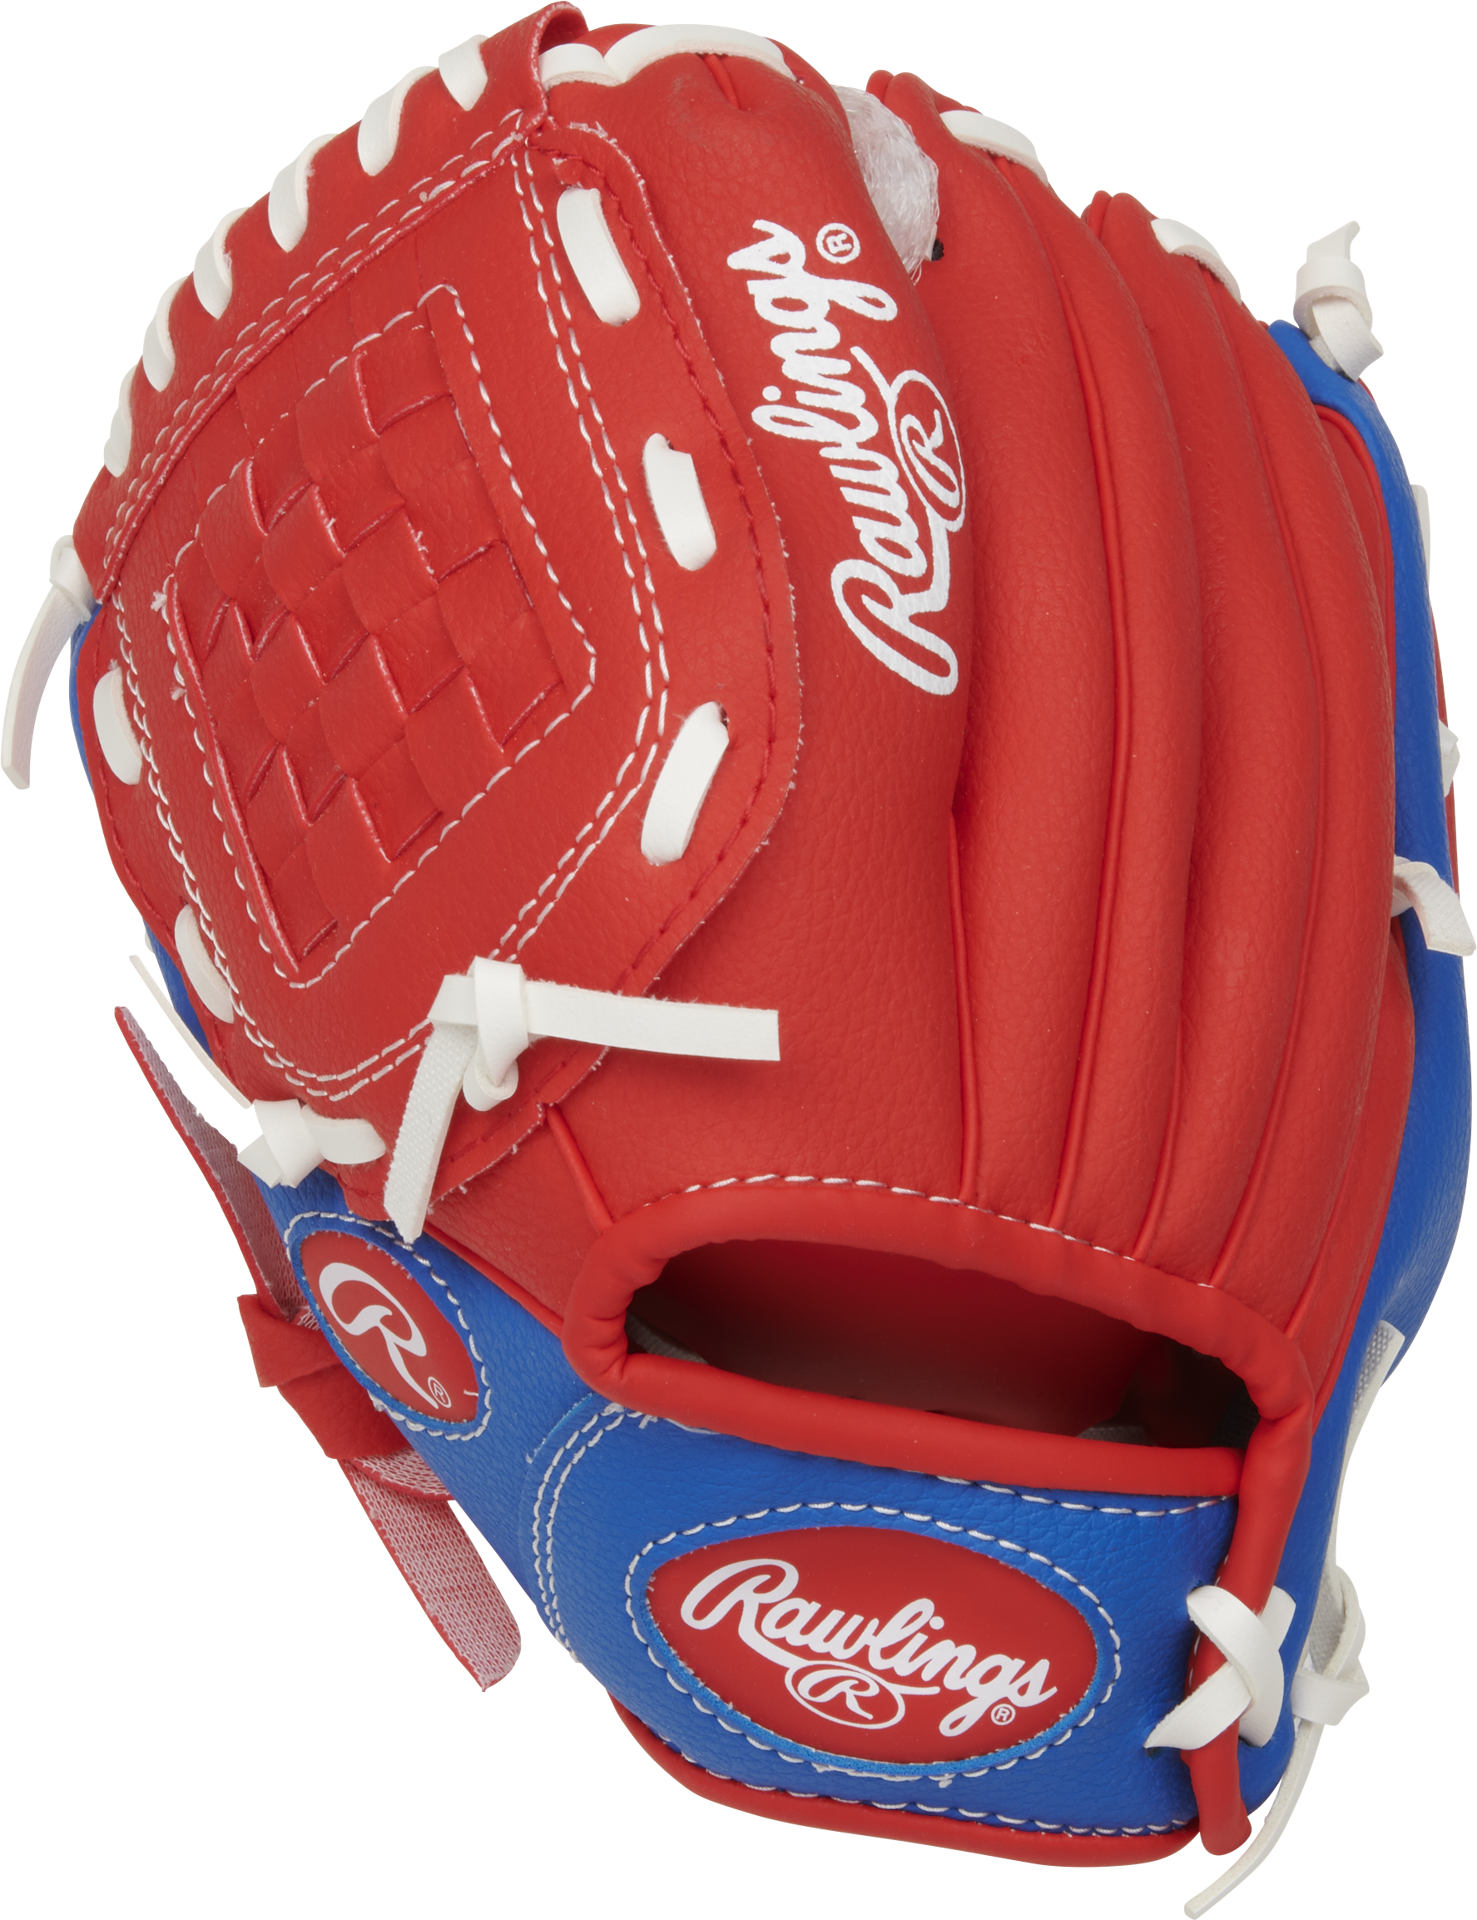 slide 3 of 3, RAWLINGS Player's Series Youth Tball Glove, 9 inch, Left Hand Throw, 1 ct